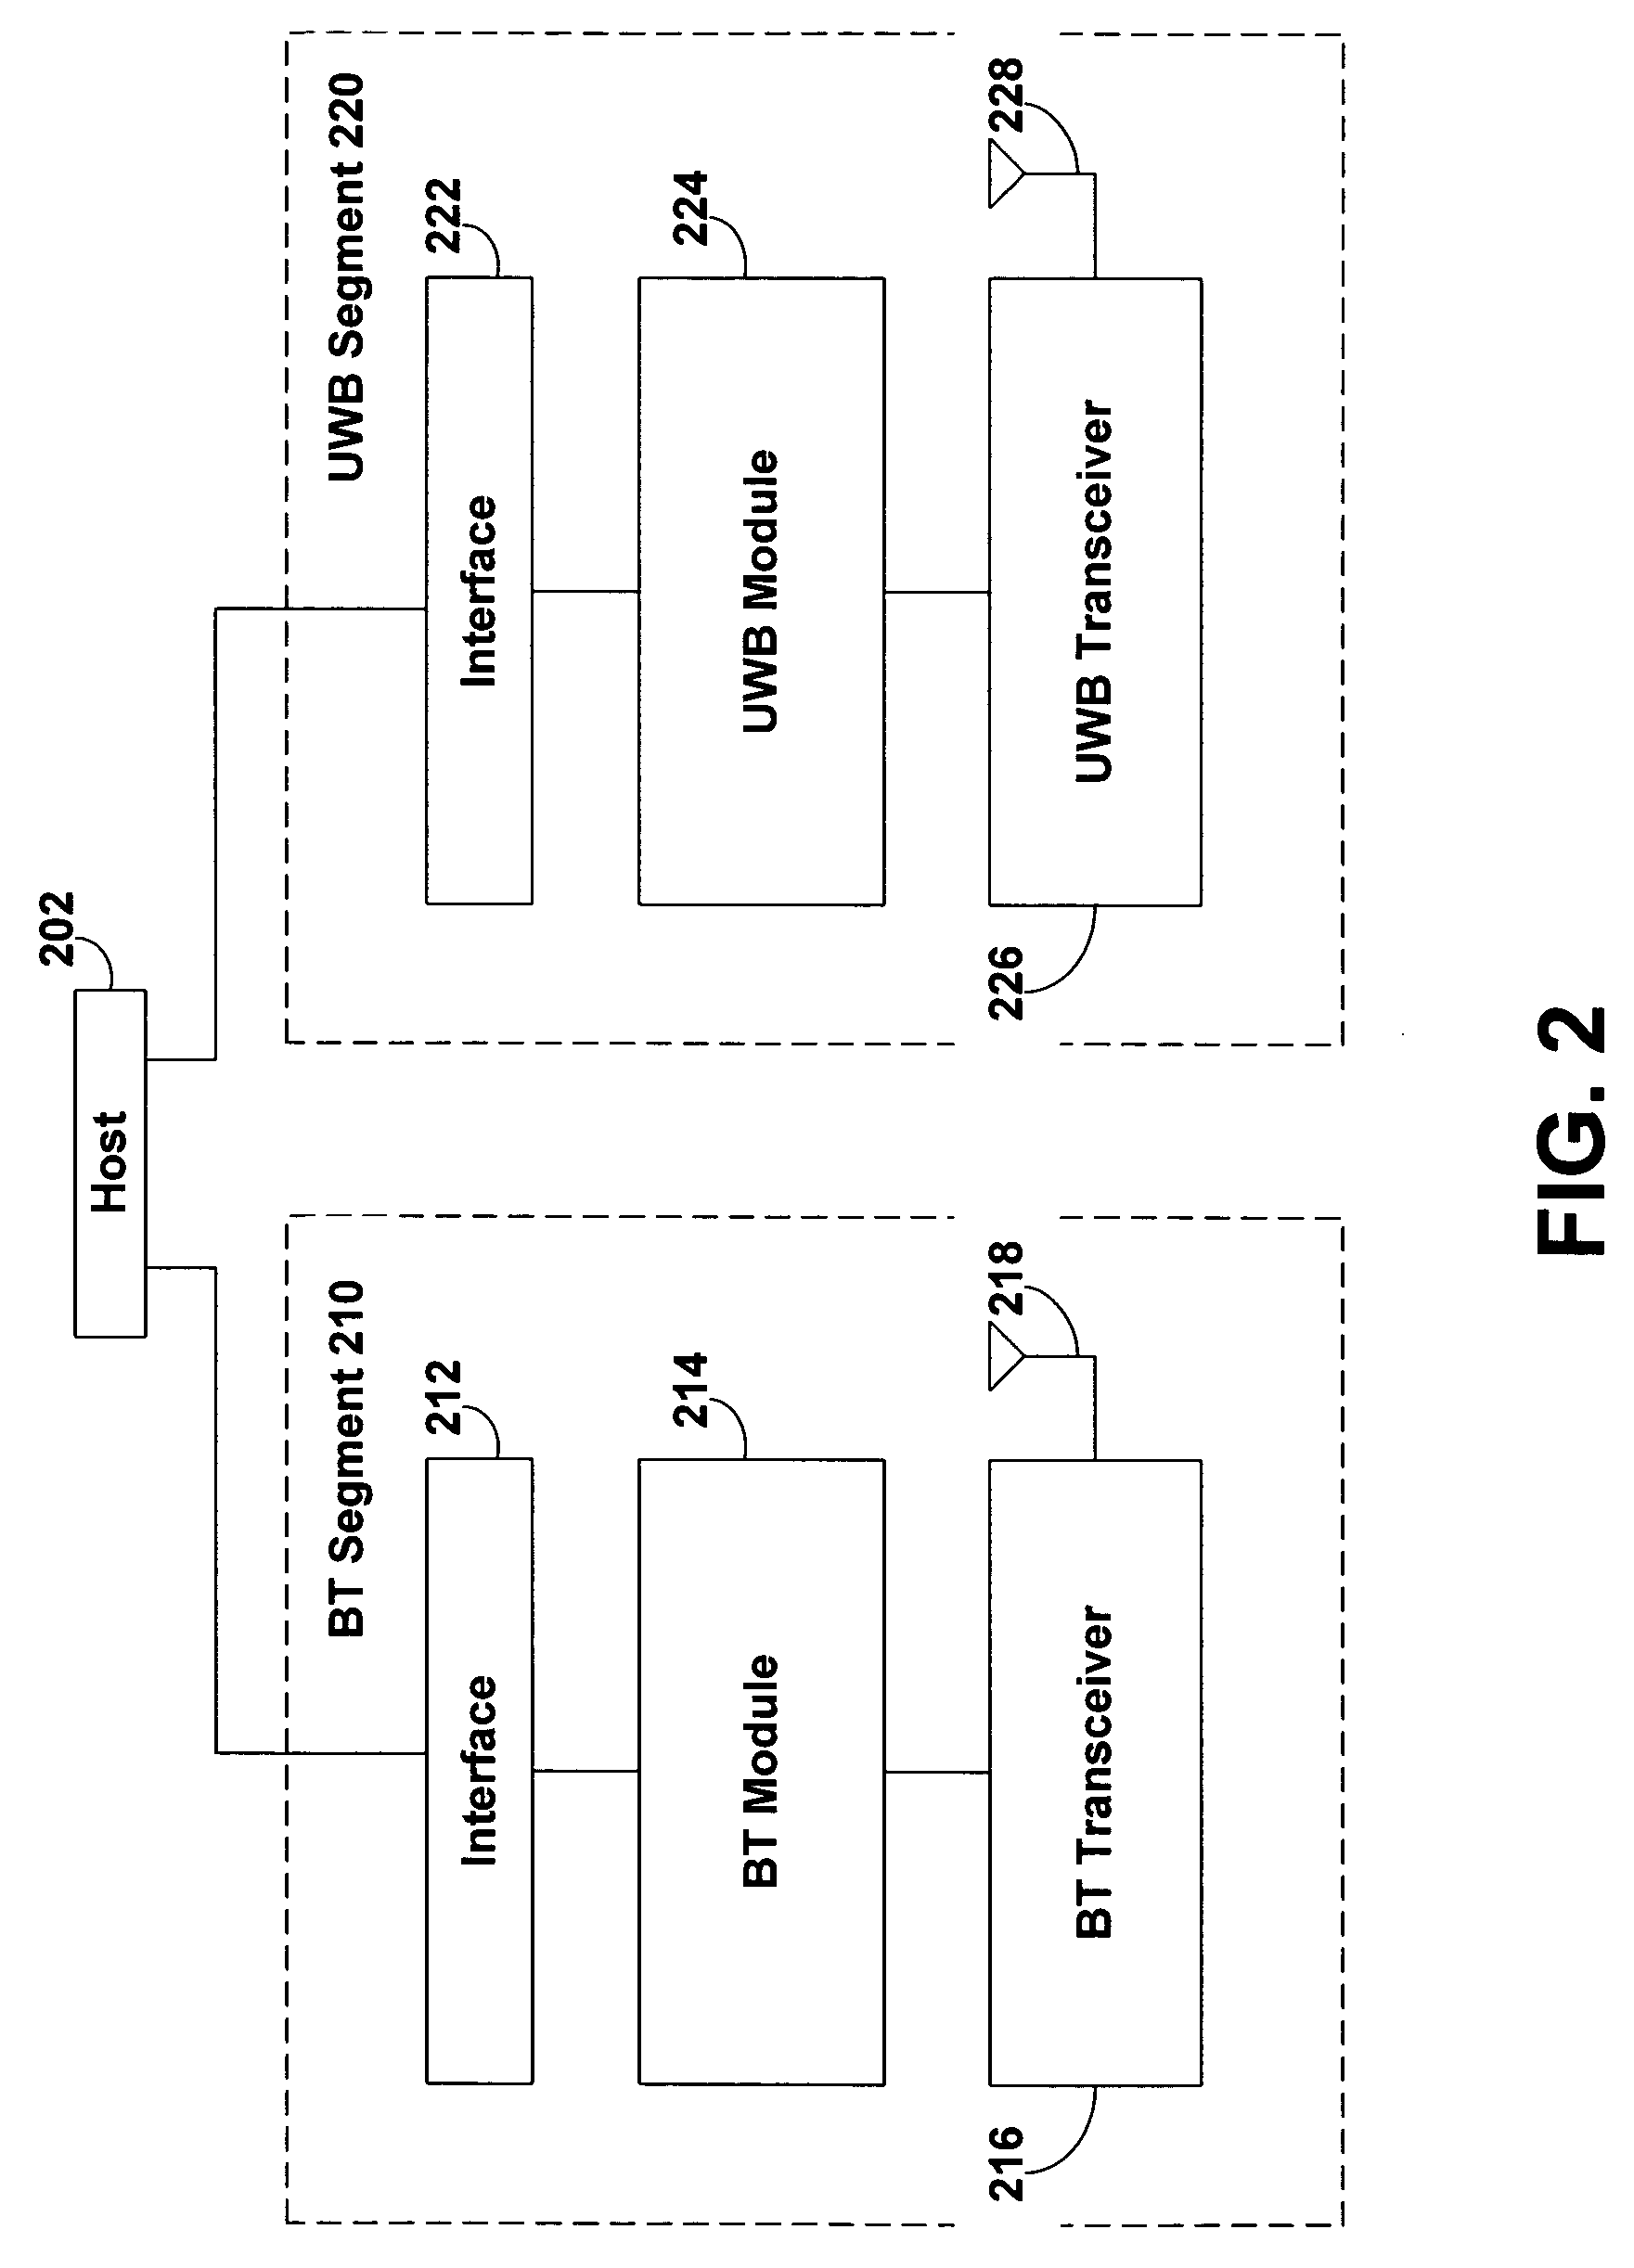 Method and system for power-based control of an ad hoc wireless communications network